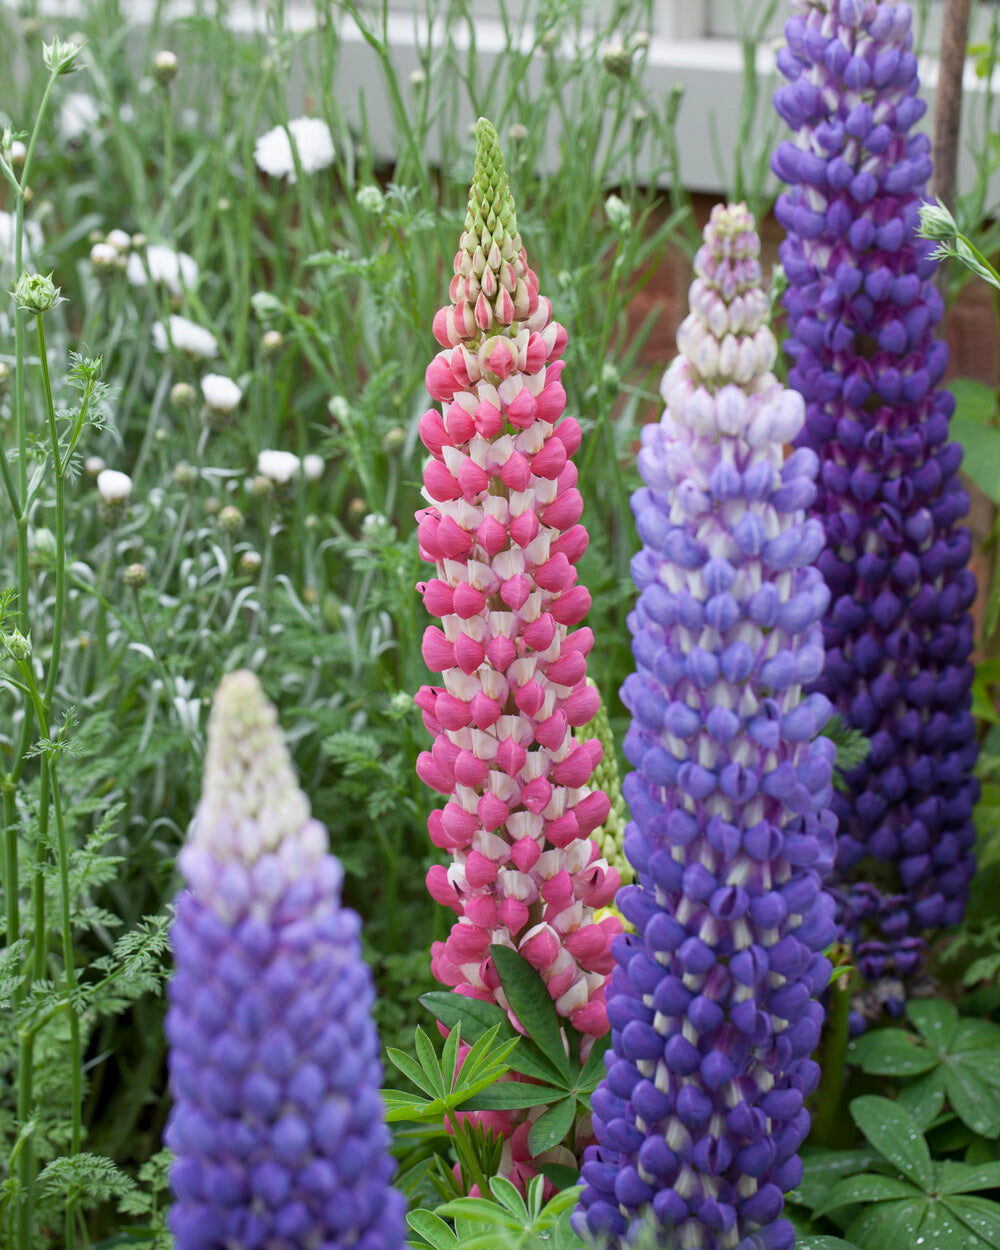 Lupinus 'Rachel de Thame' bare roots — Buy pink/white lupins (lupines ...